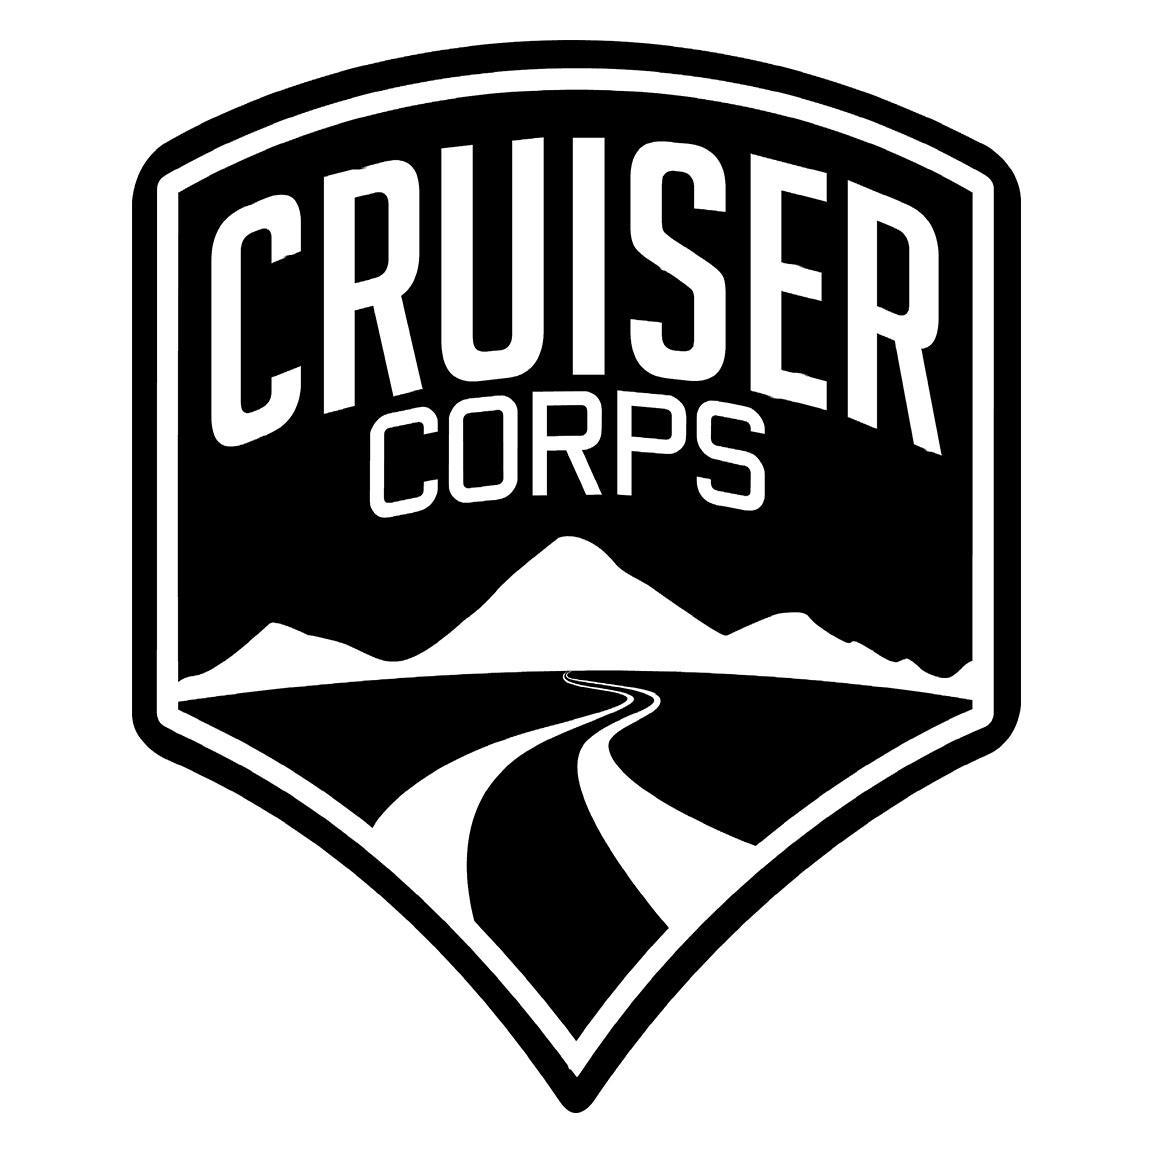 Land Cruiser Parts + Services. Visit us online or come say hi in OKC. #cruisercorps